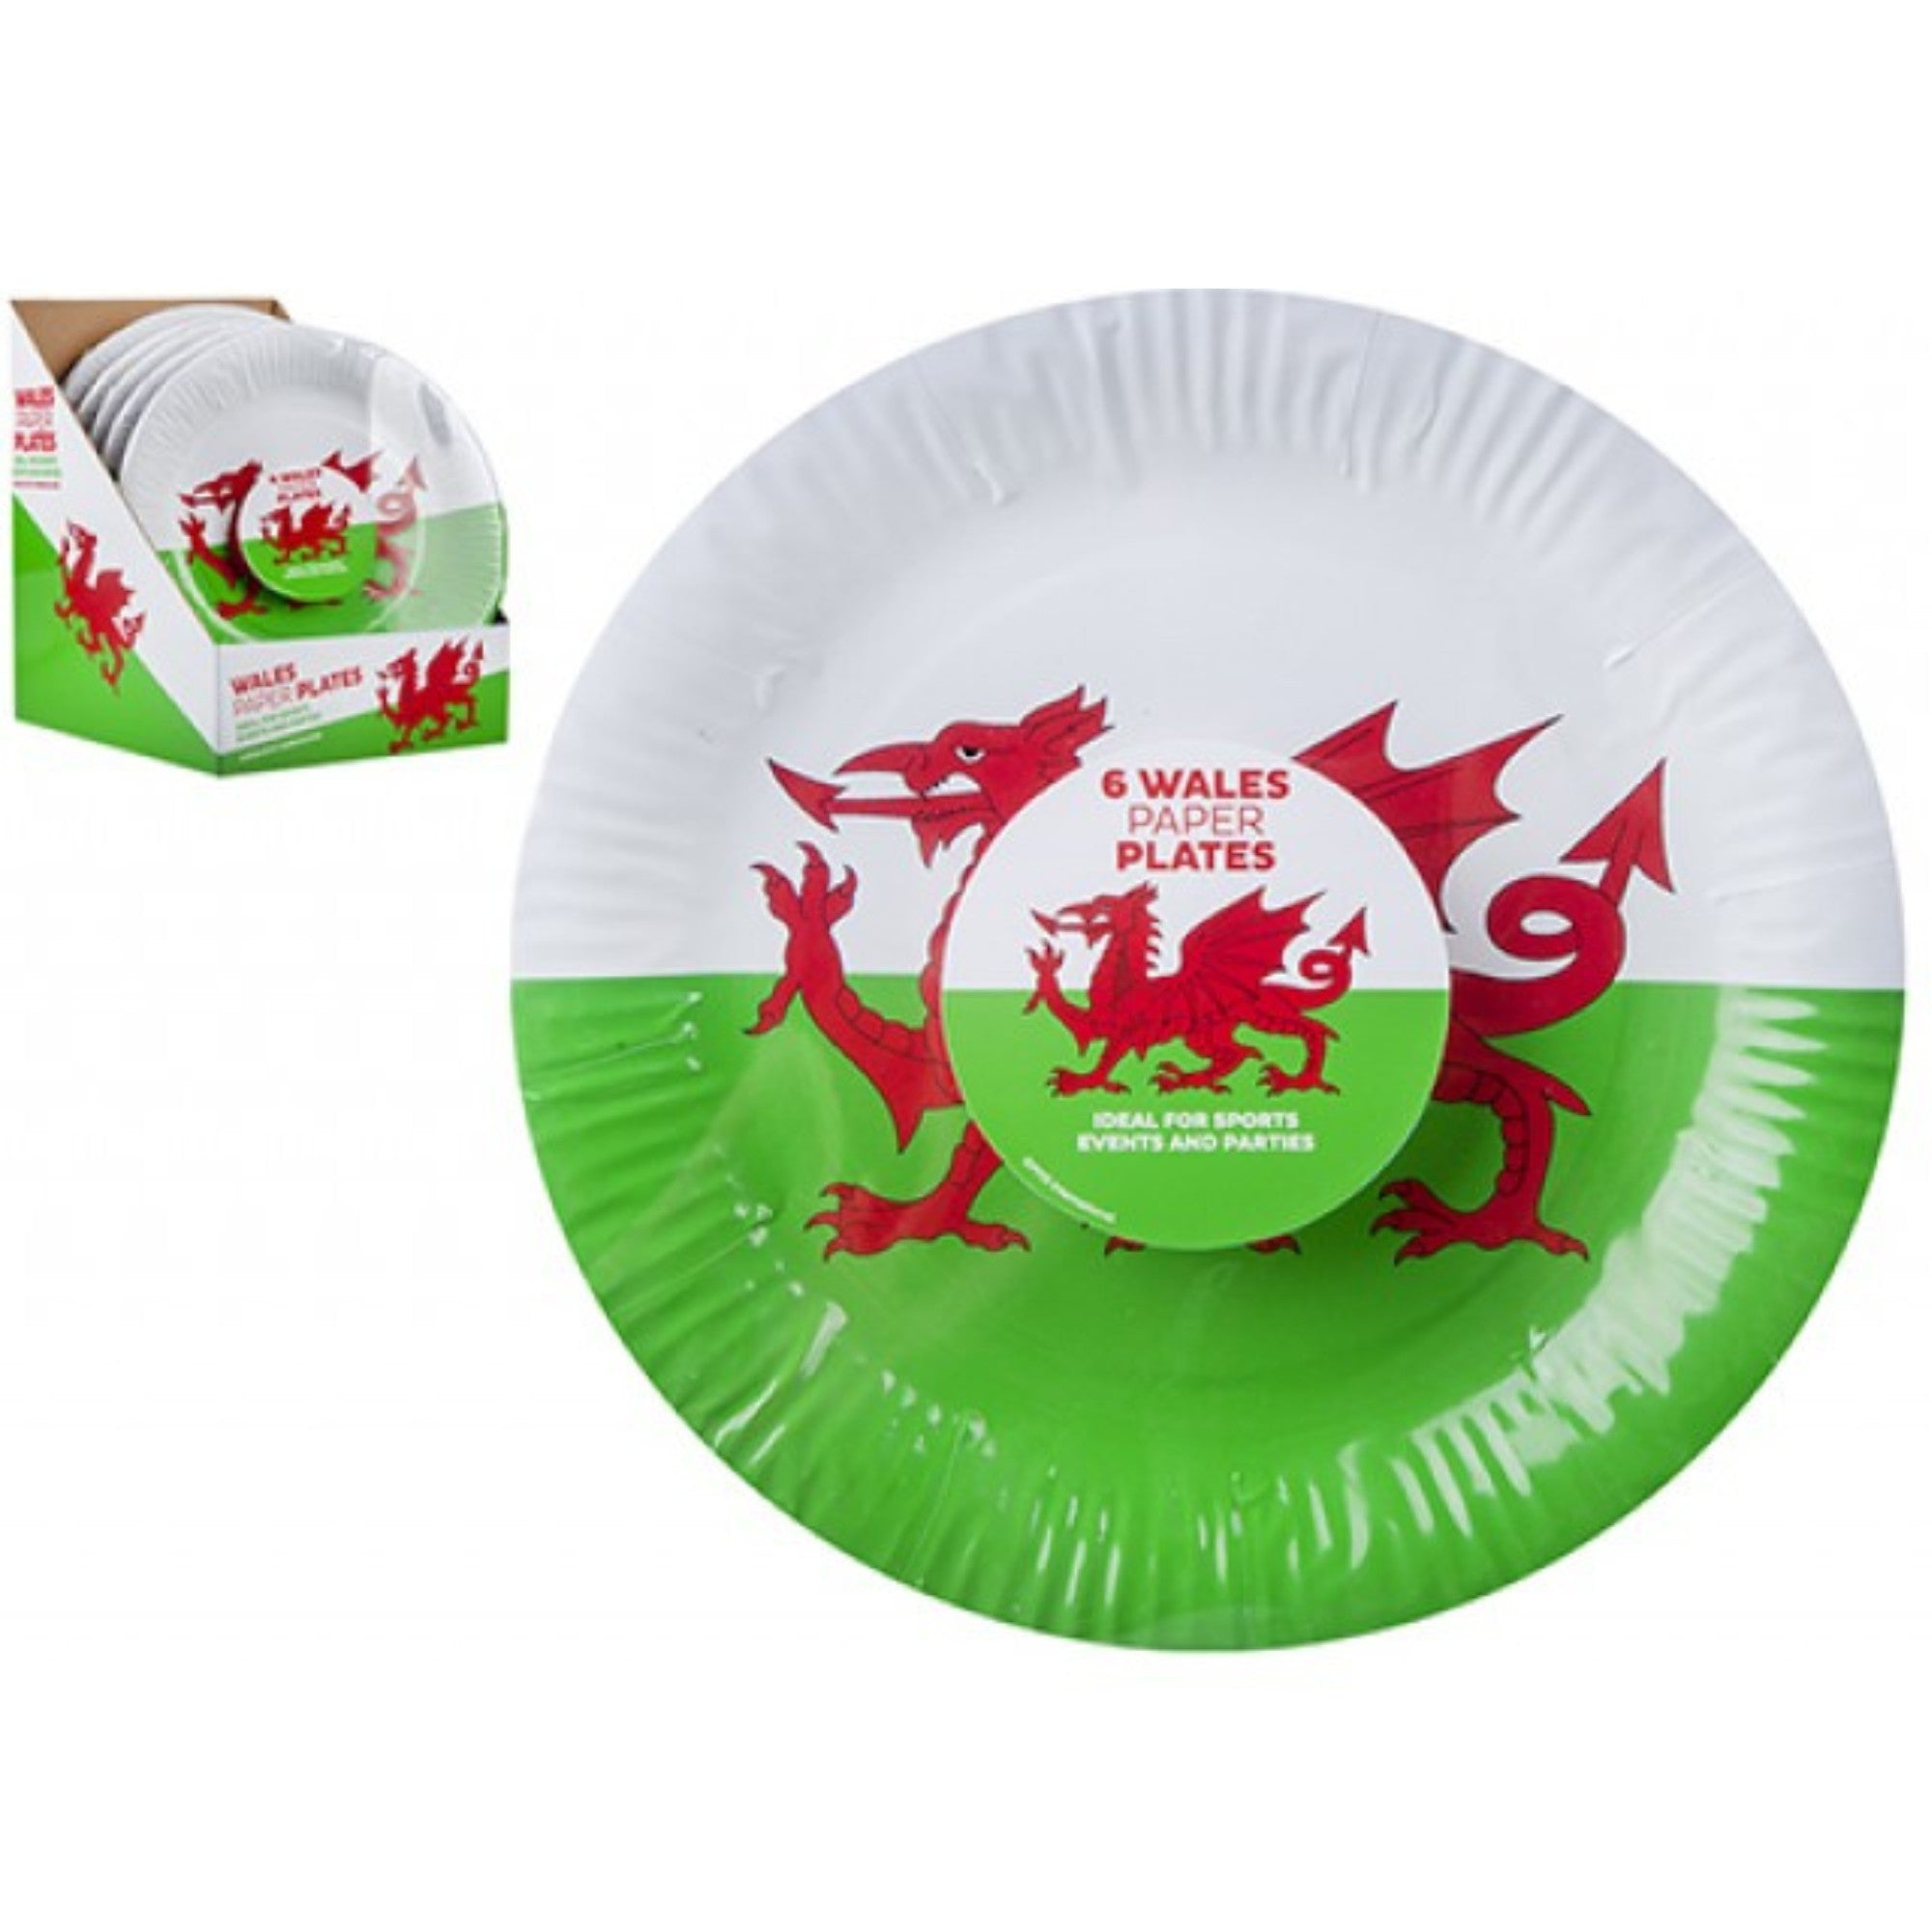 Wales Round Paper Plates - Pack of 6 - 22.8cm